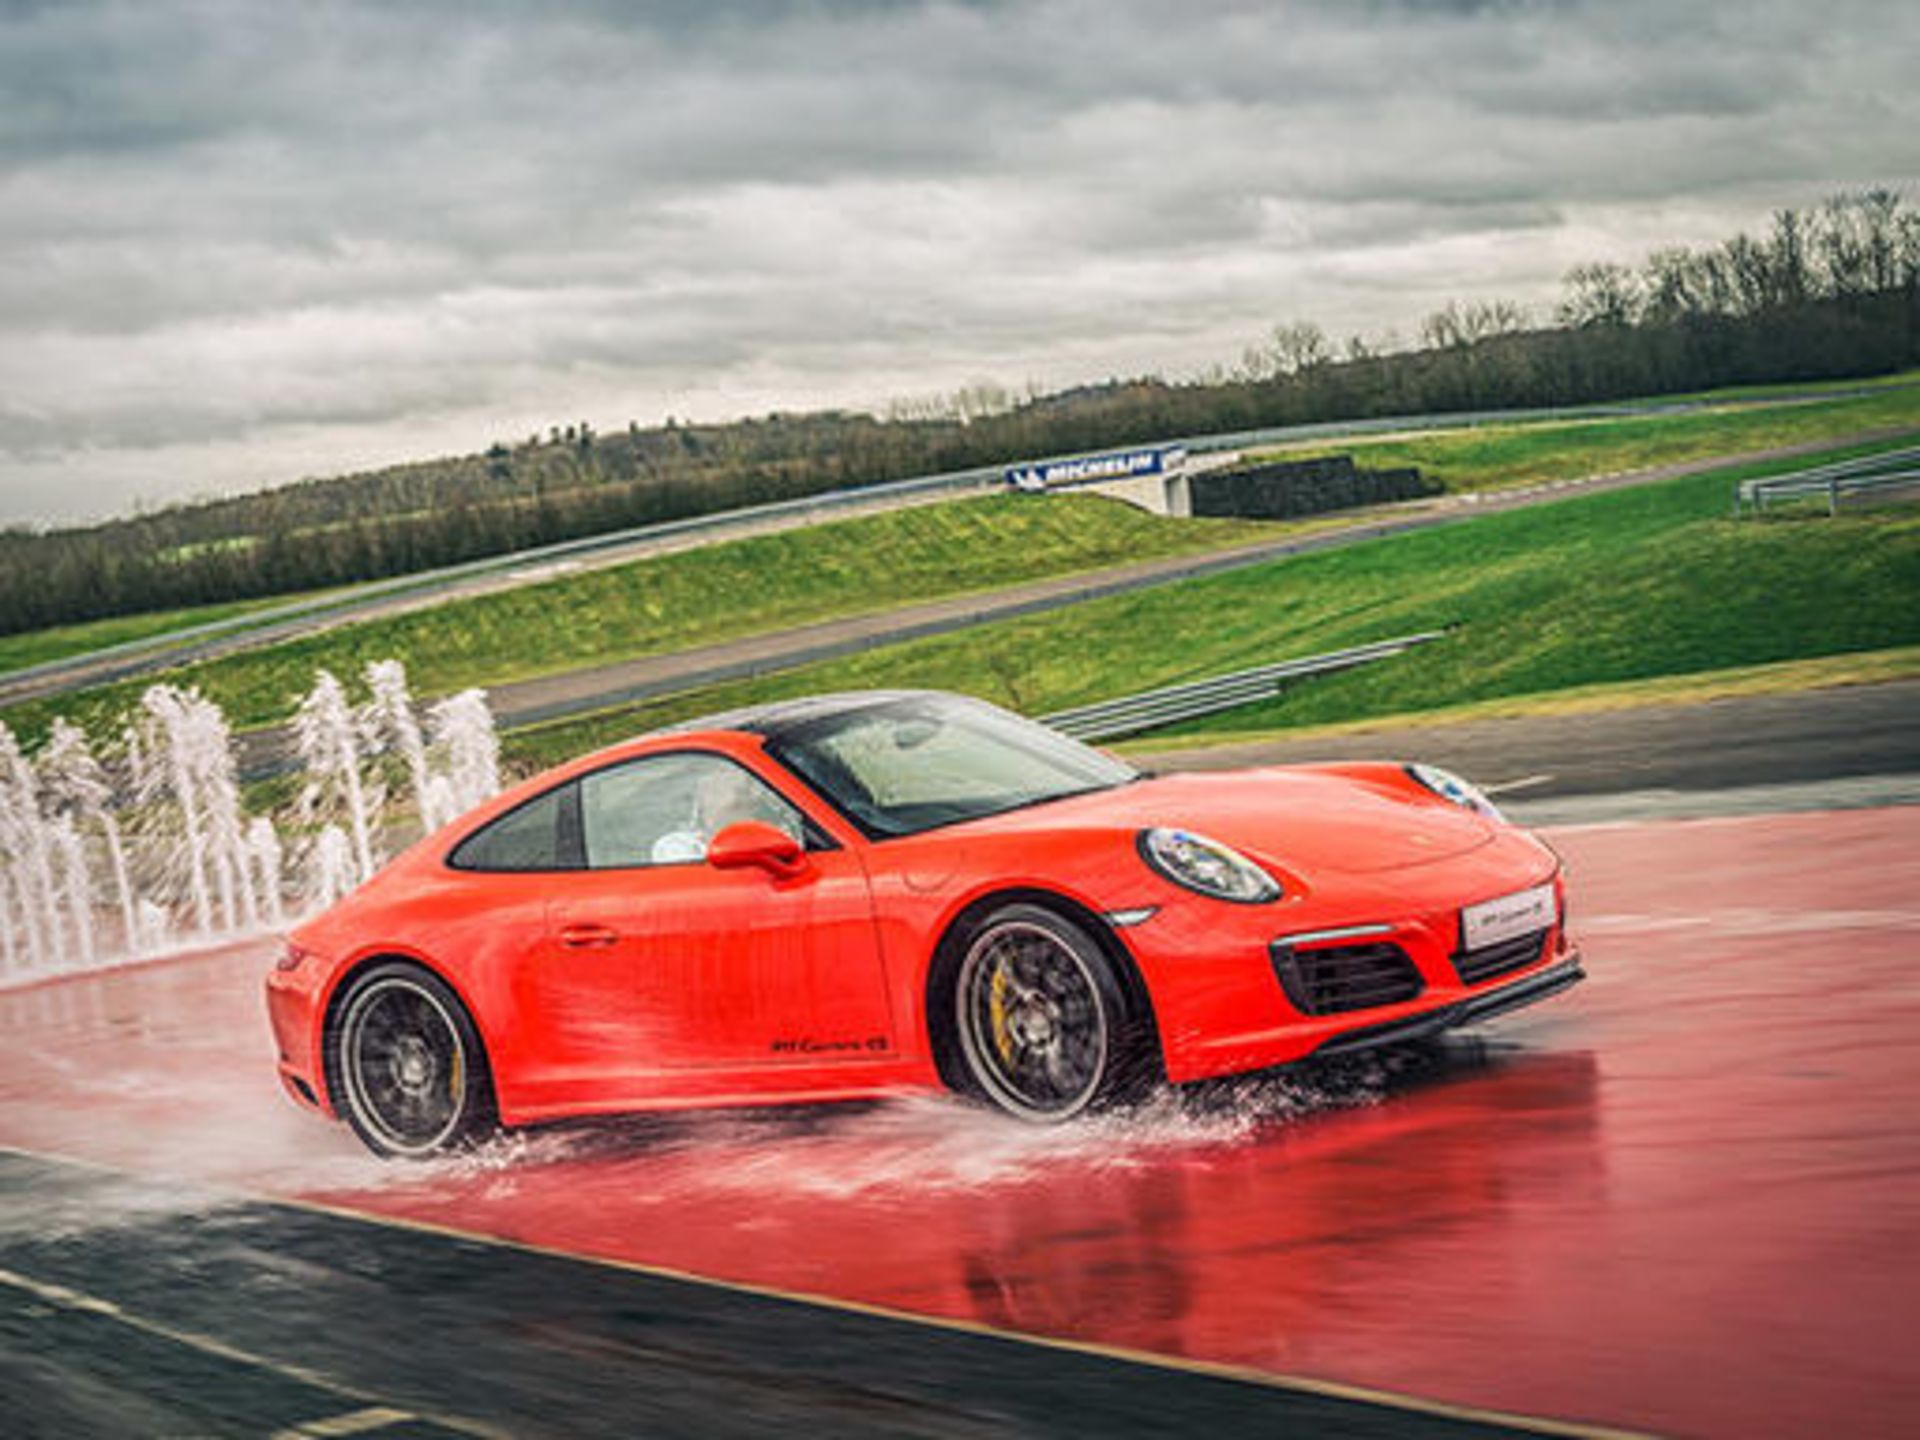 OFFICIAL PORSCHE SILVERSTONE DRIVING EXPERIENCE WITH LUNCH - APRIL 24 BOOKING - NO VAT! - Image 4 of 4